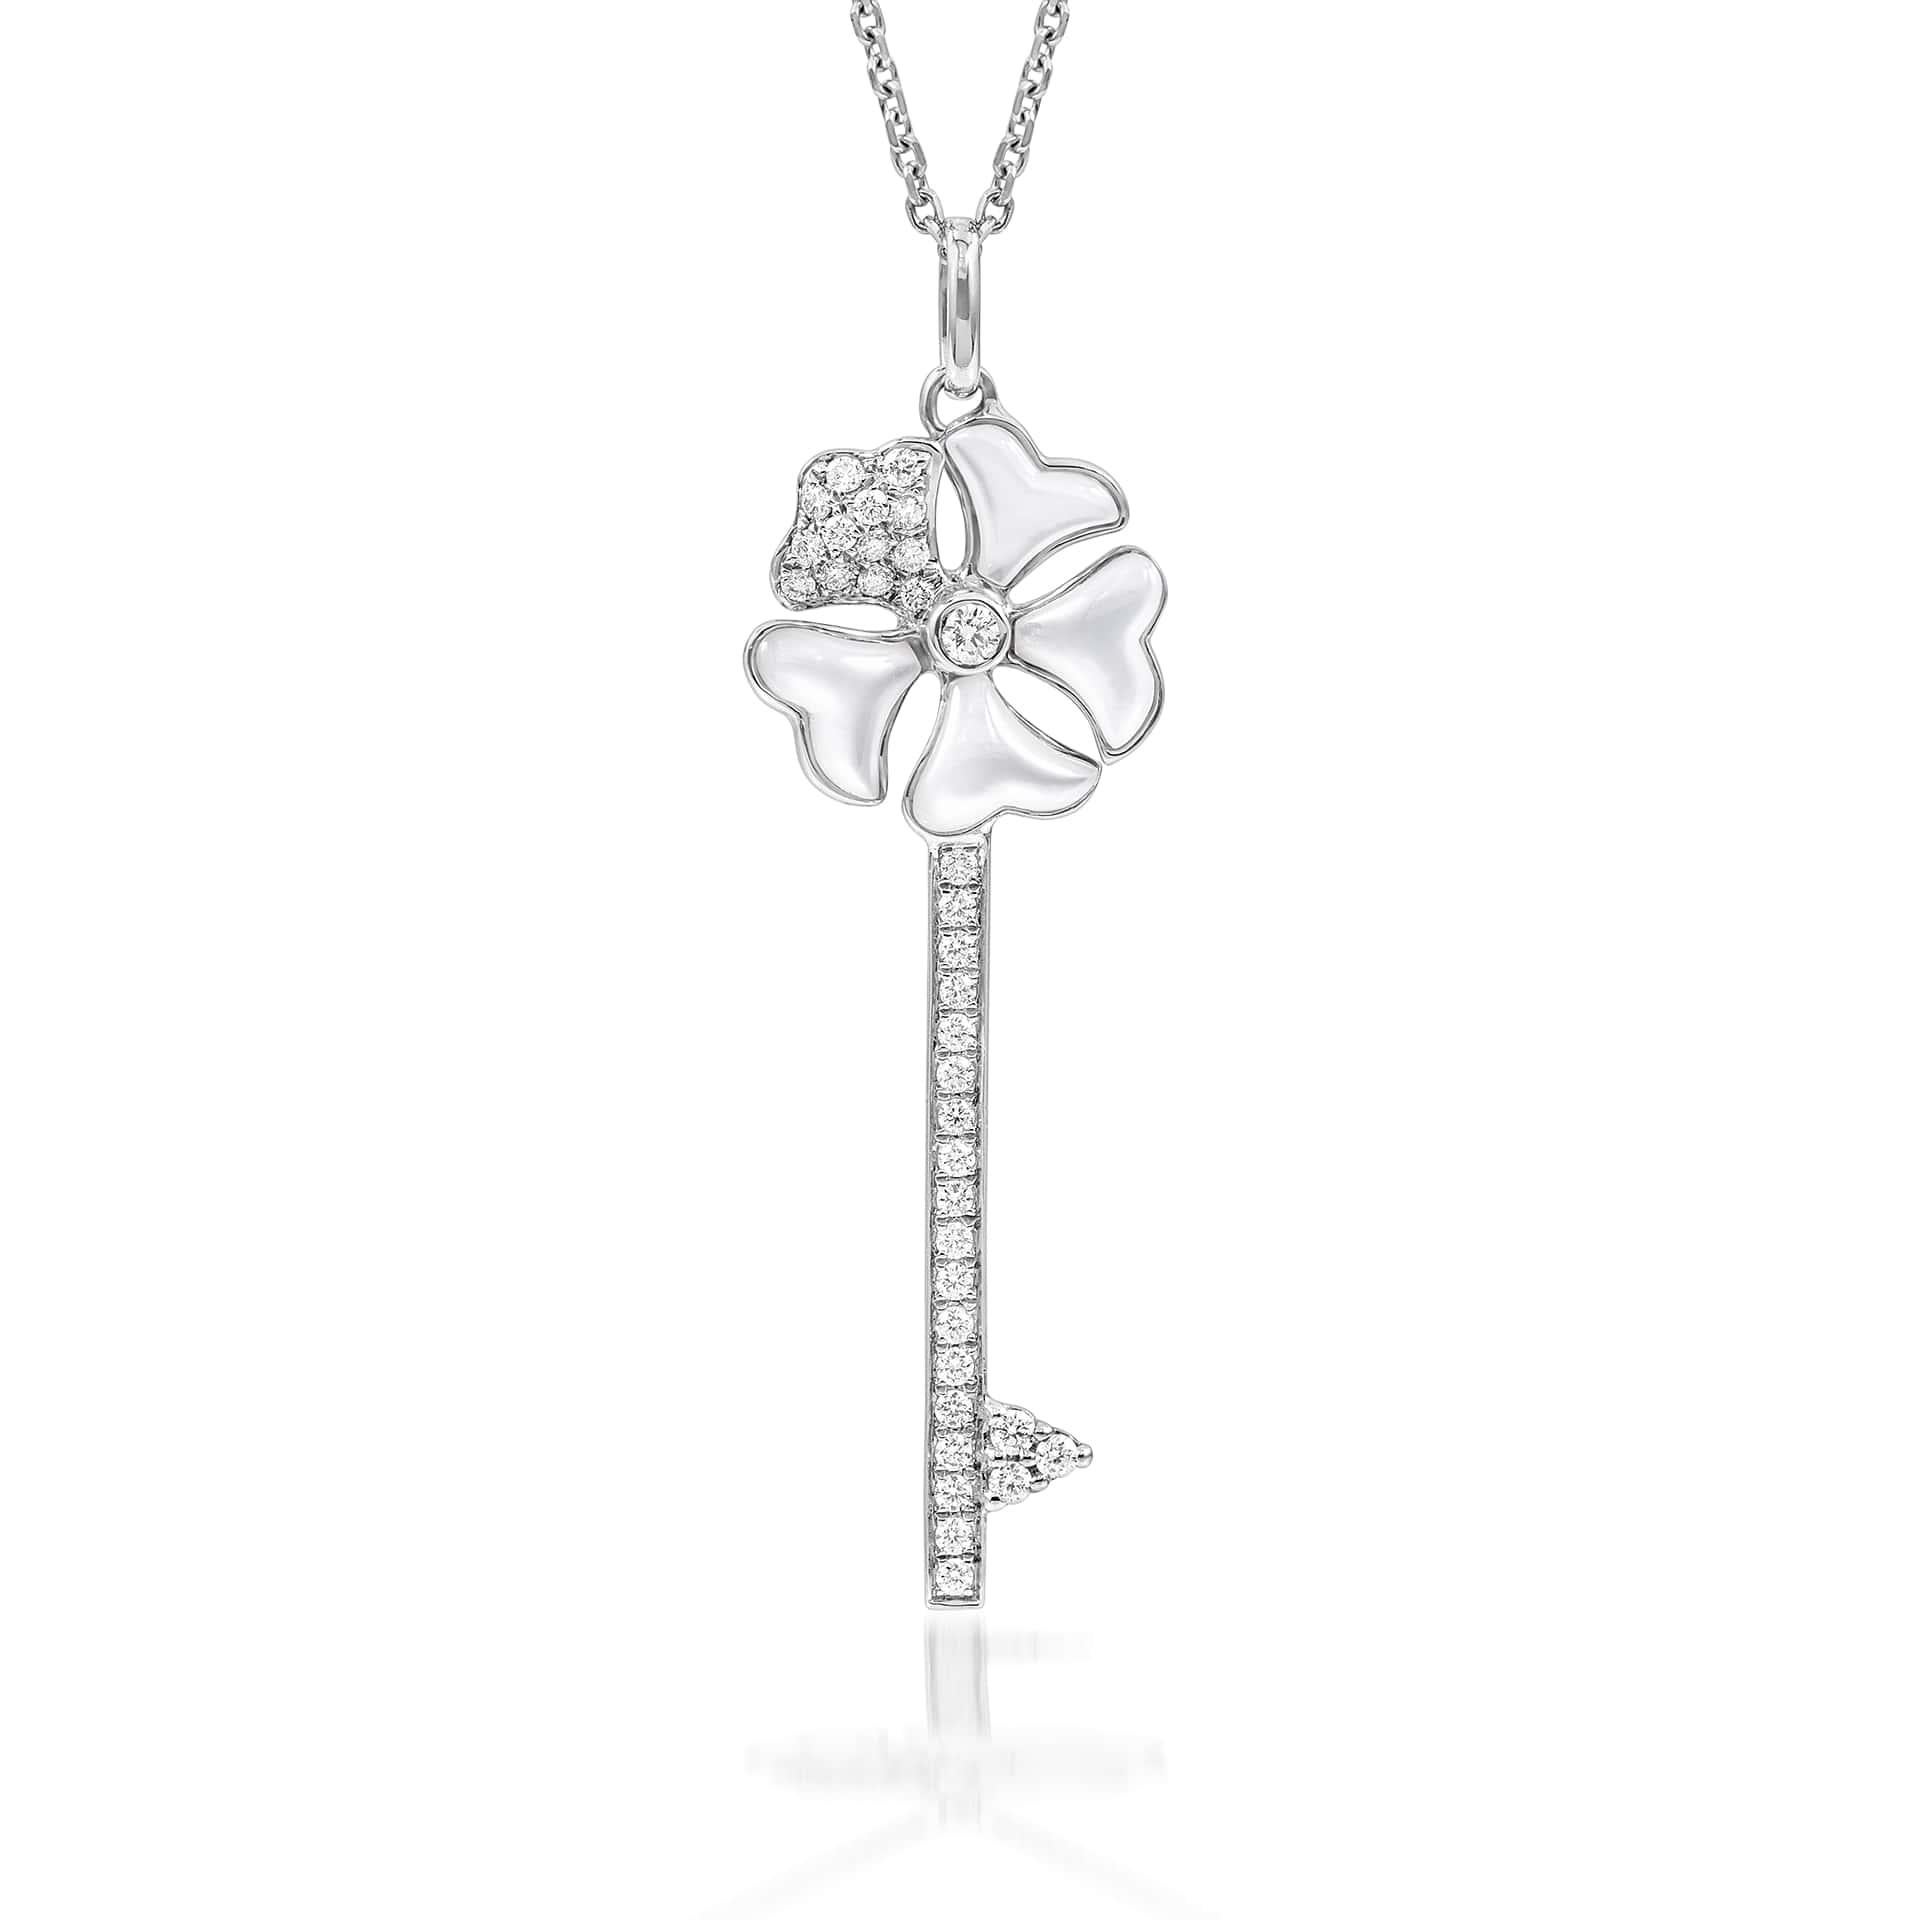 Bloom Diamond and Mother-of-Pearl Key Necklace in 18K White Gold

Inspired by the exquisite petals of the alpine cinquefoil flower, the Bloom collection combines the richness of diamonds and precious metals with the light versatility of this